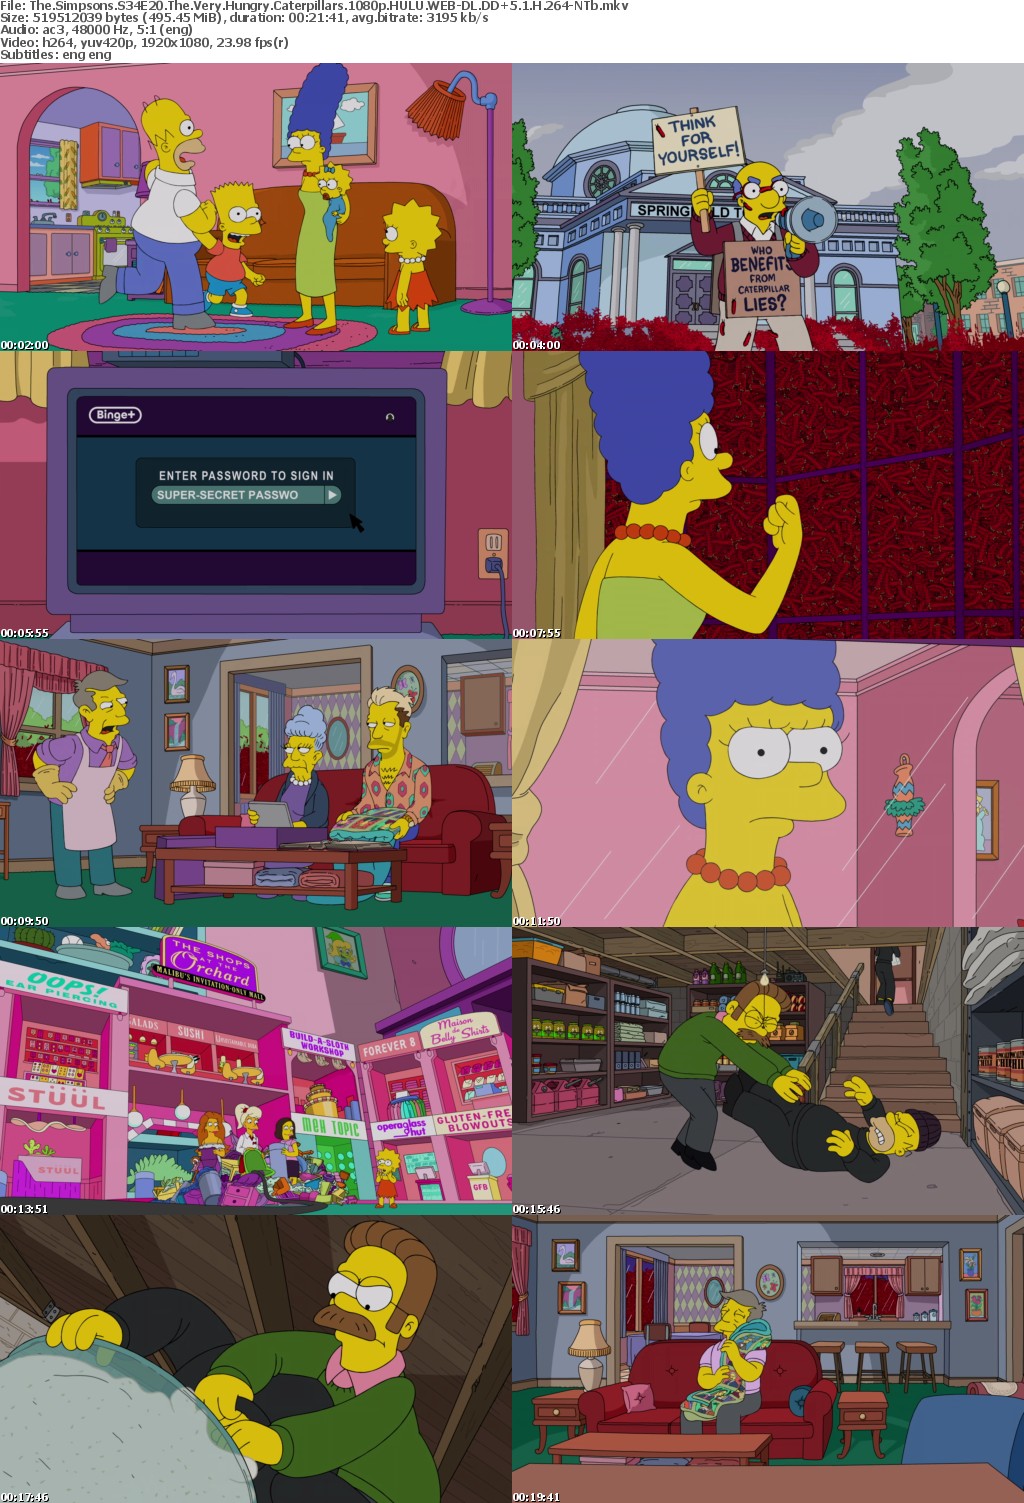 The Simpsons S34E20 The Very Hungry Caterpillars 1080p HULU WEBRip DDP5 1 x264-NTb